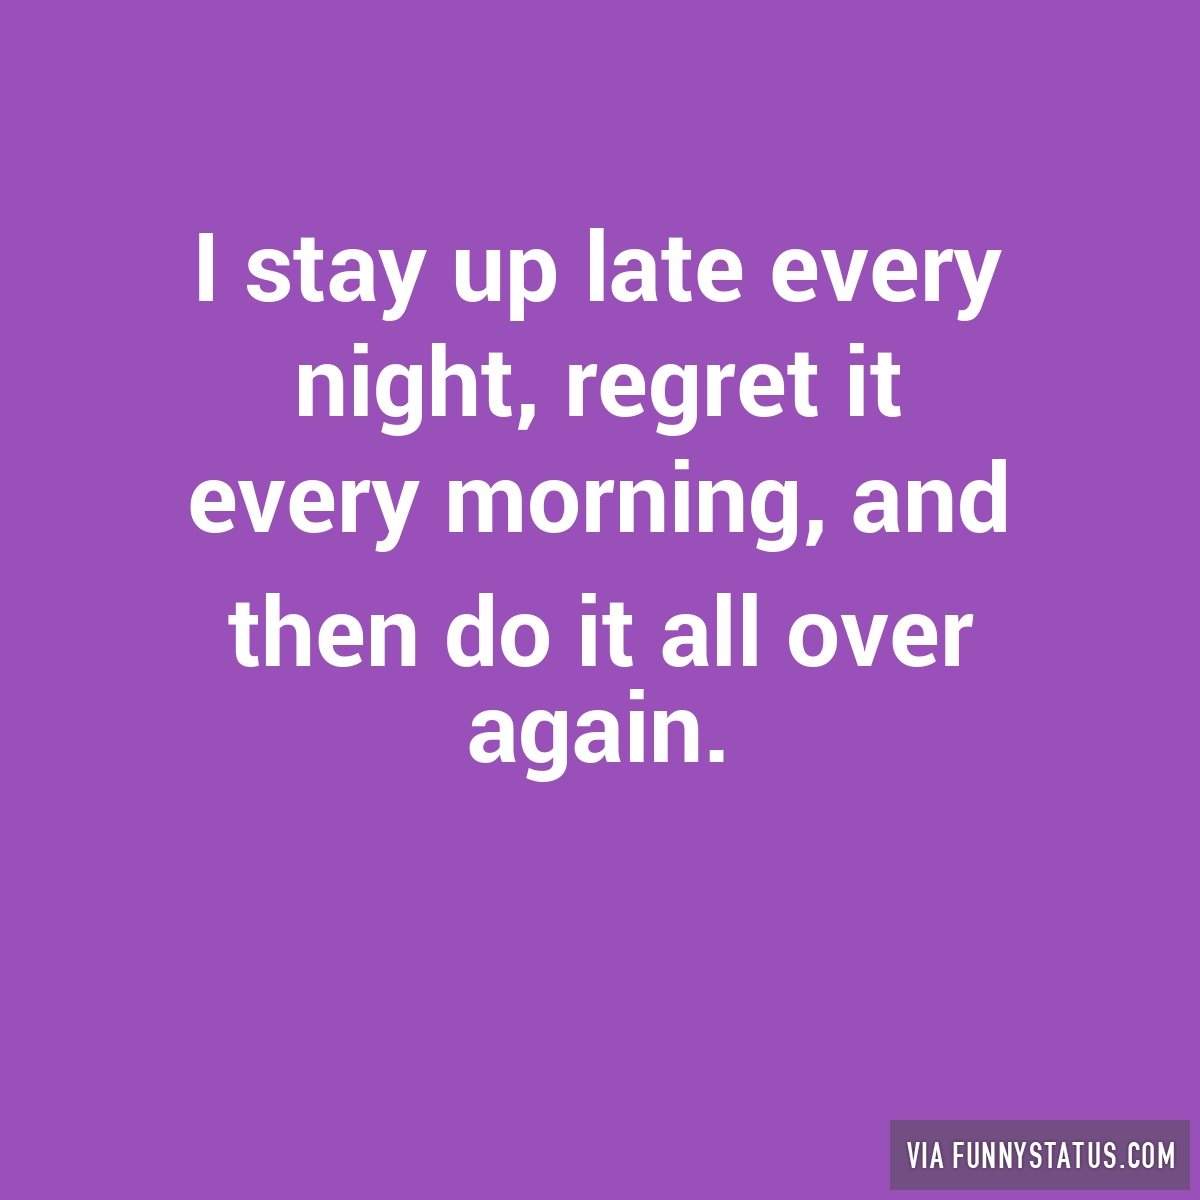 http://livequotes.online/quotes/i/staying-up-late-funny-quotes-Quotes/default.html